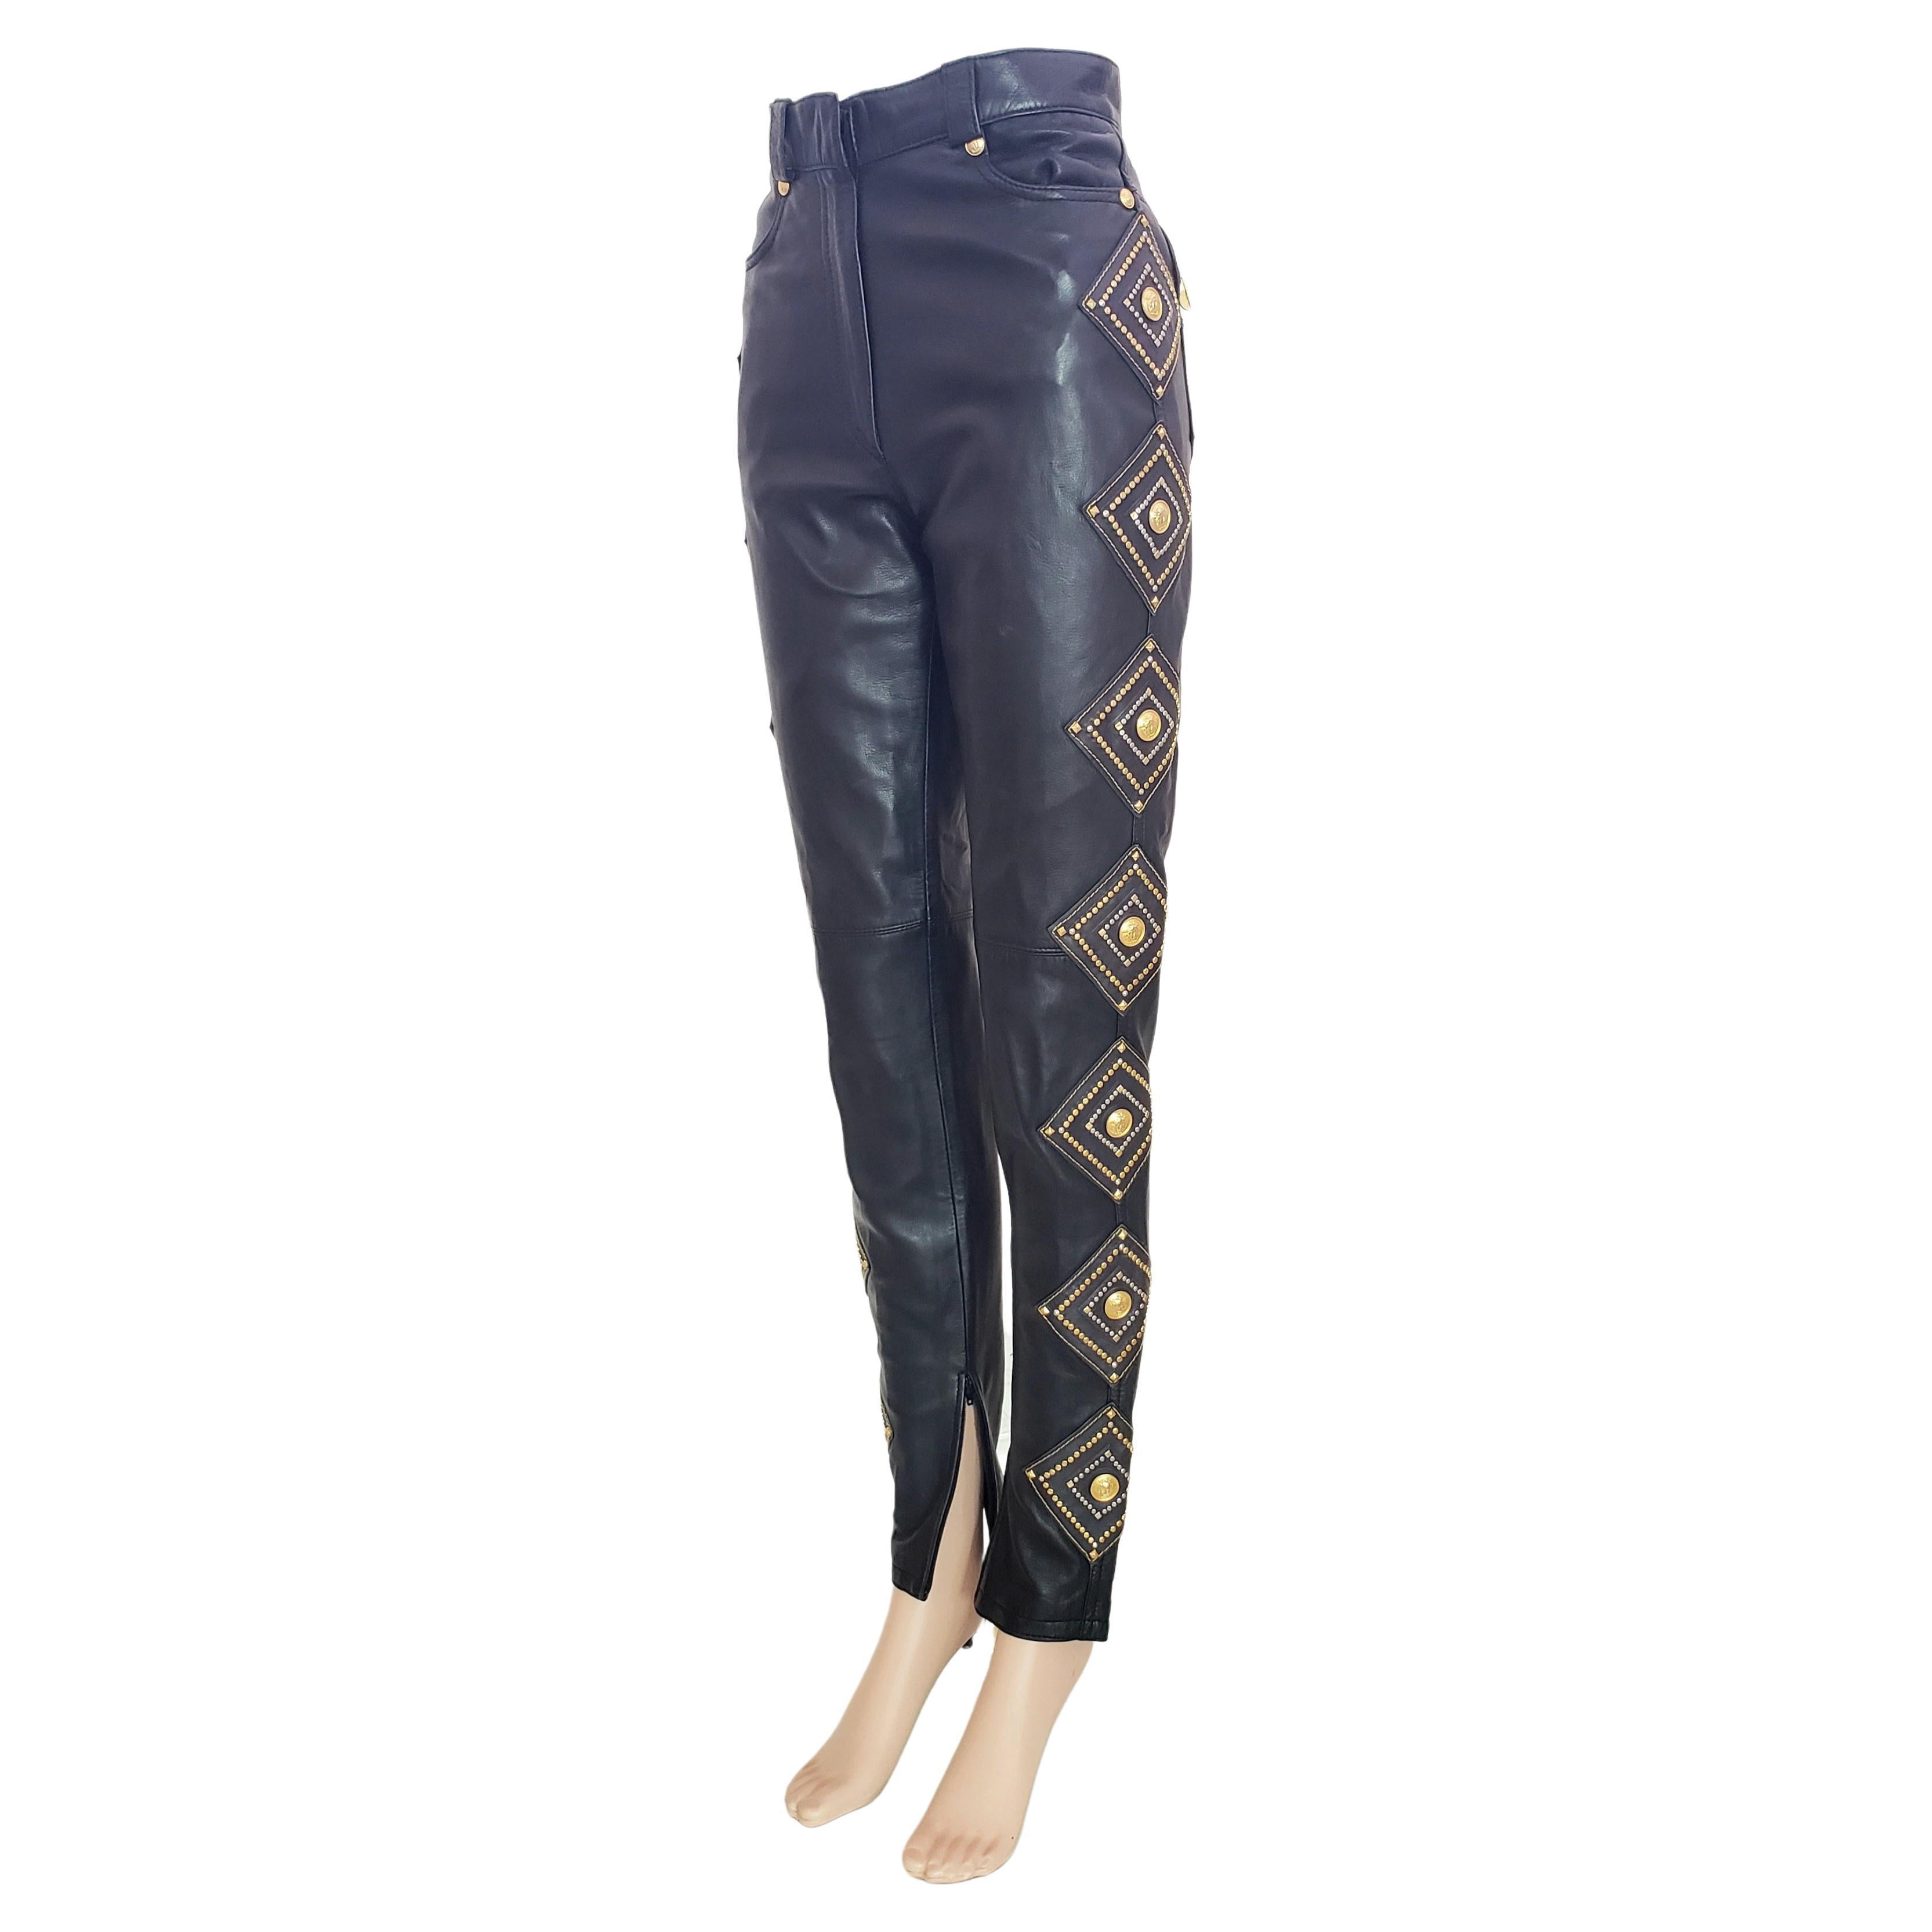 1991 GIANNI VERSACE PRIVATE MUSEUM WORTHY COLLECTION BLACK LEATHER STUDDED Pants For Sale